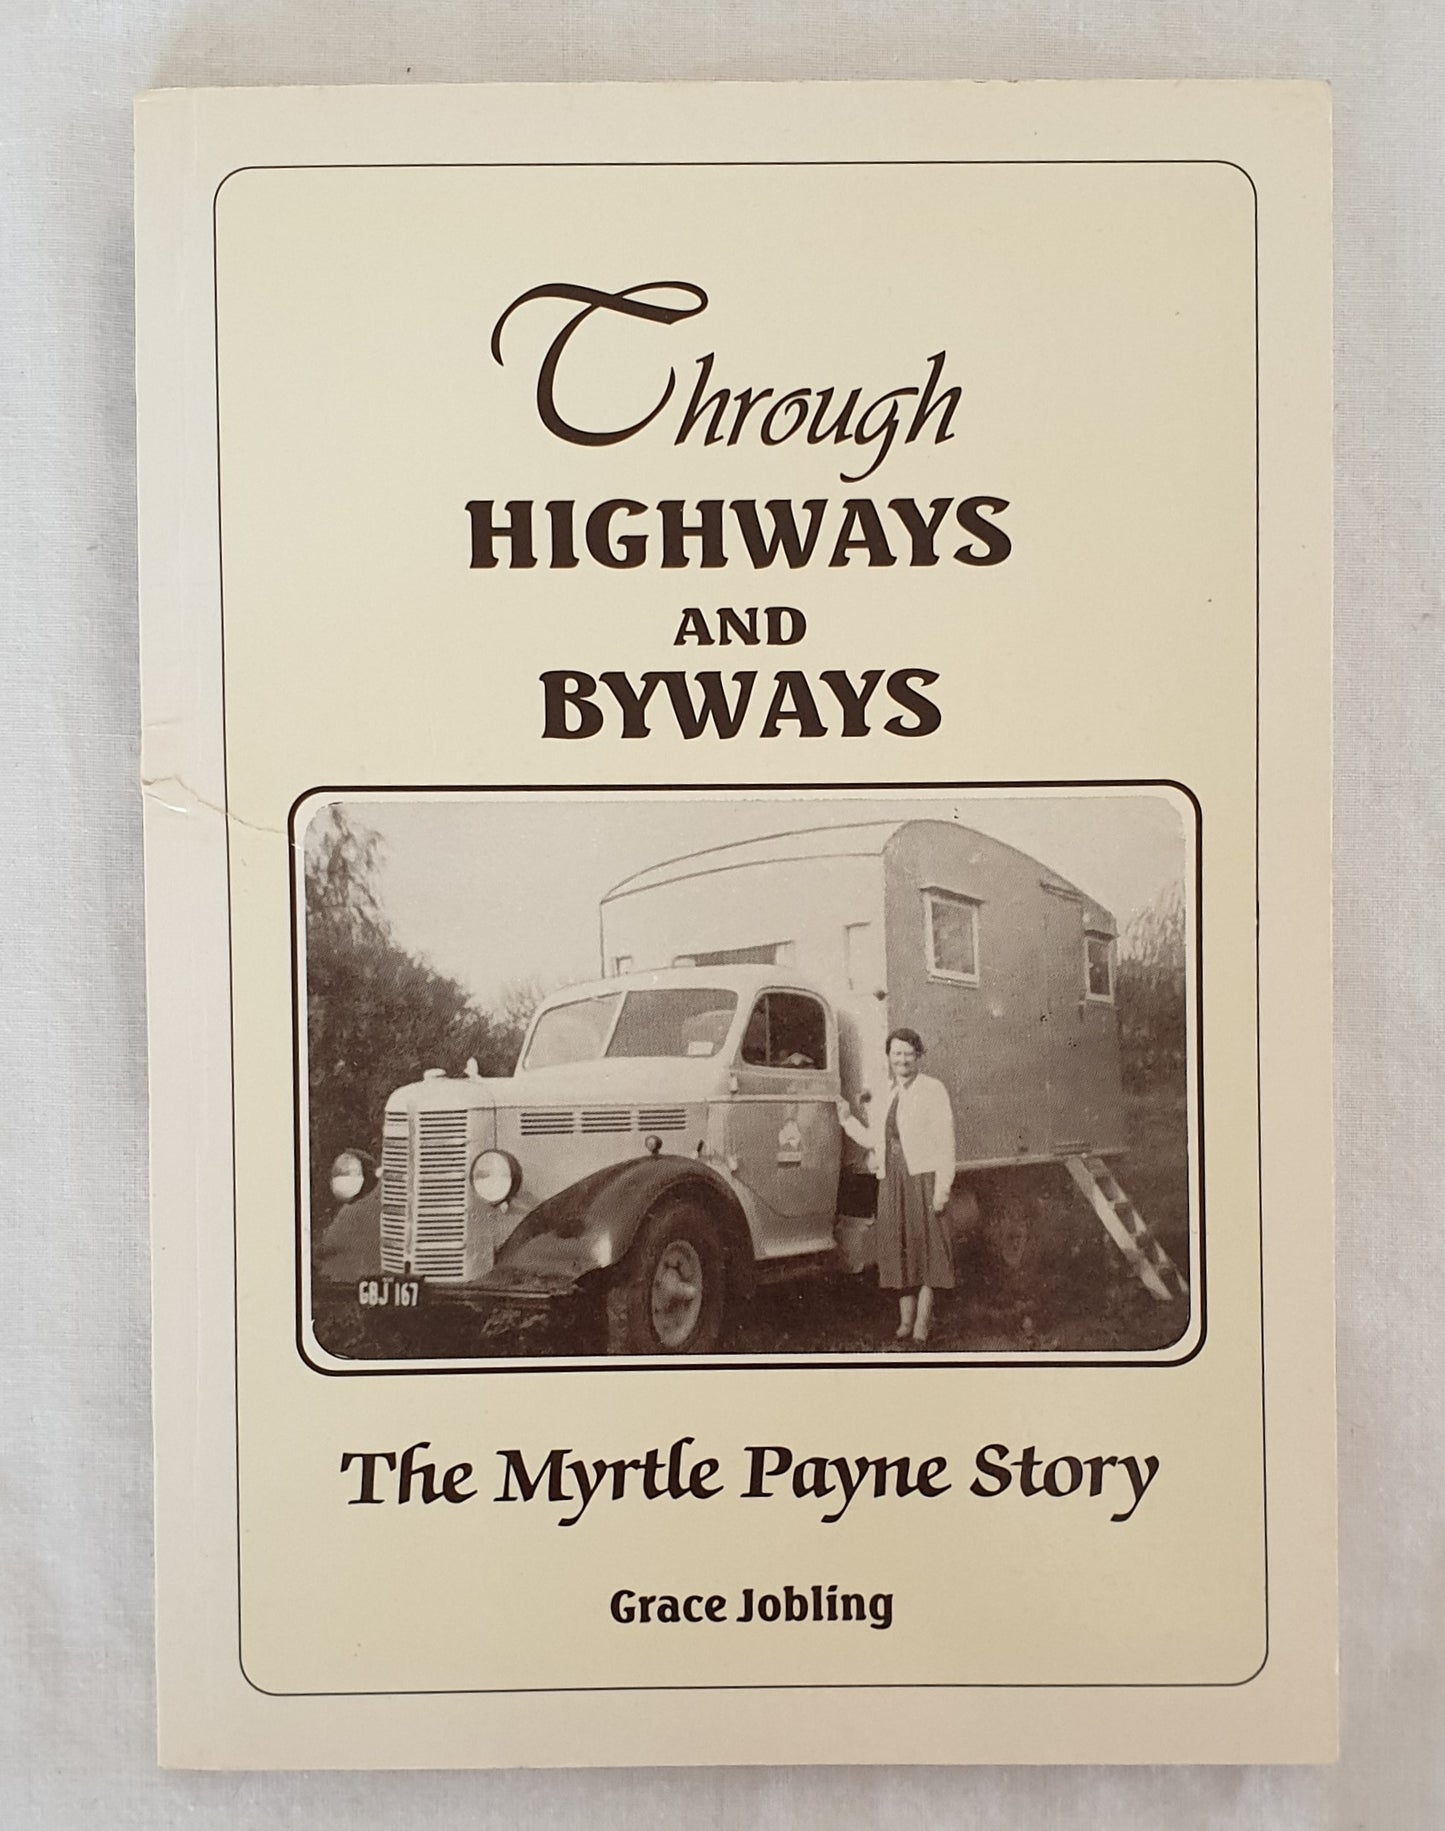 Through Highways and Byways  The Myrtle Payne Story  by Grace Jobling